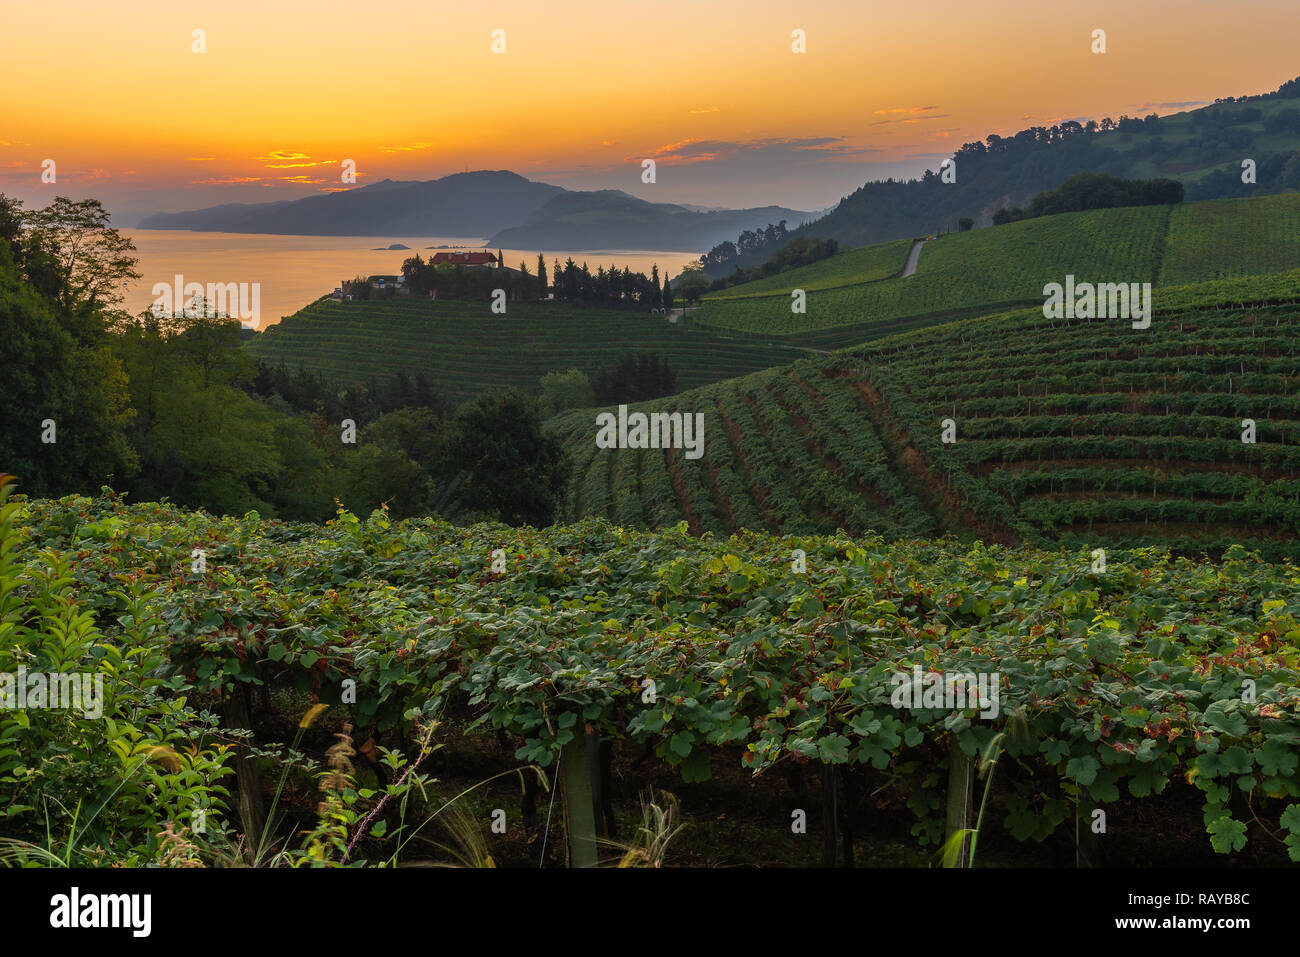 Txakoli vineyards at sunrise, Cantabrian sea in the background, Getaria in Basque Country, Spain Stock Photo